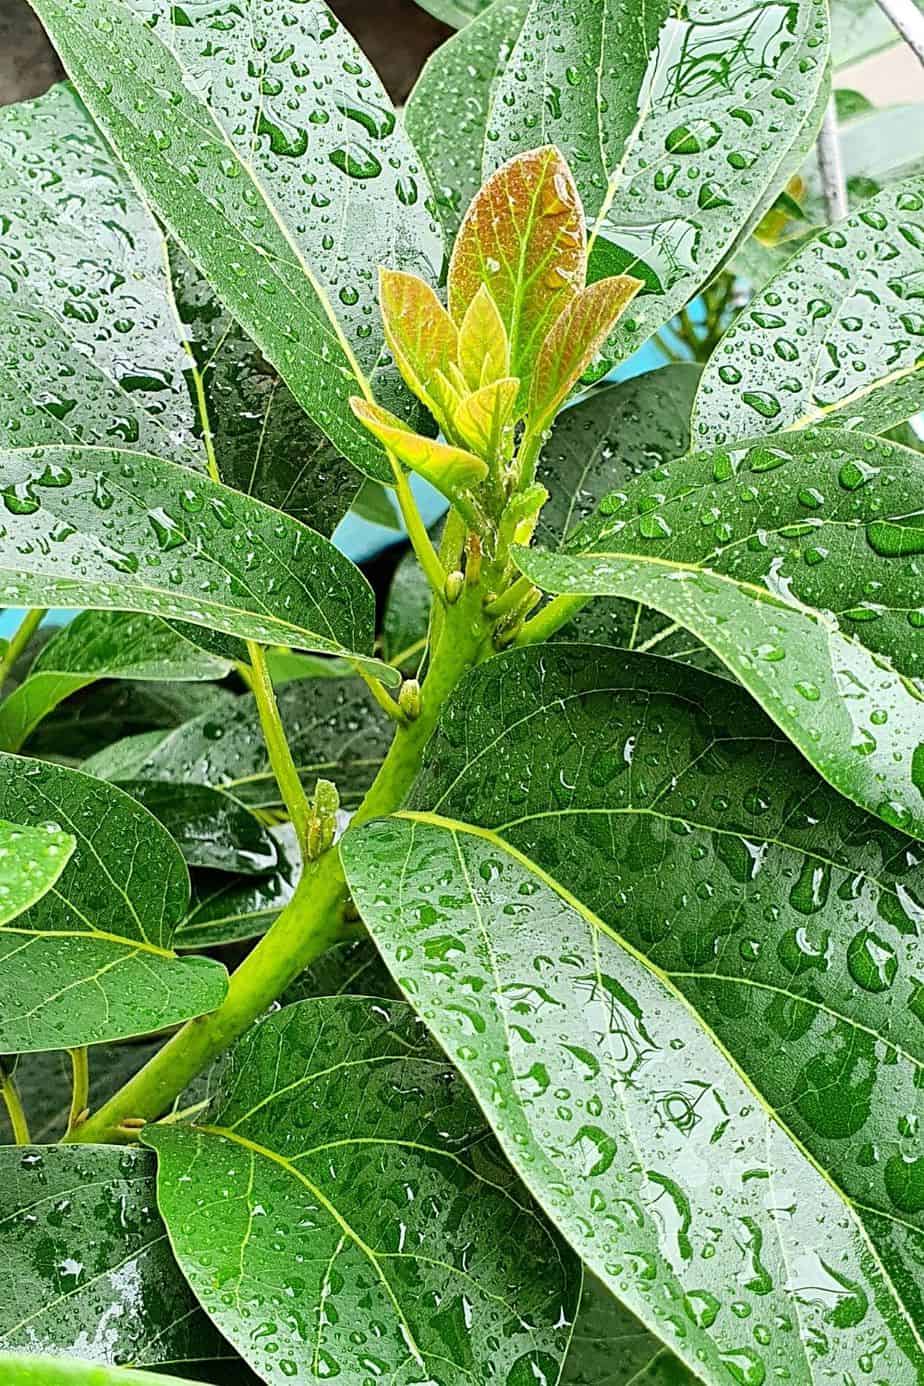 As avocado plants are subtropical plants, they need to grow in a humid environment with plenty of water